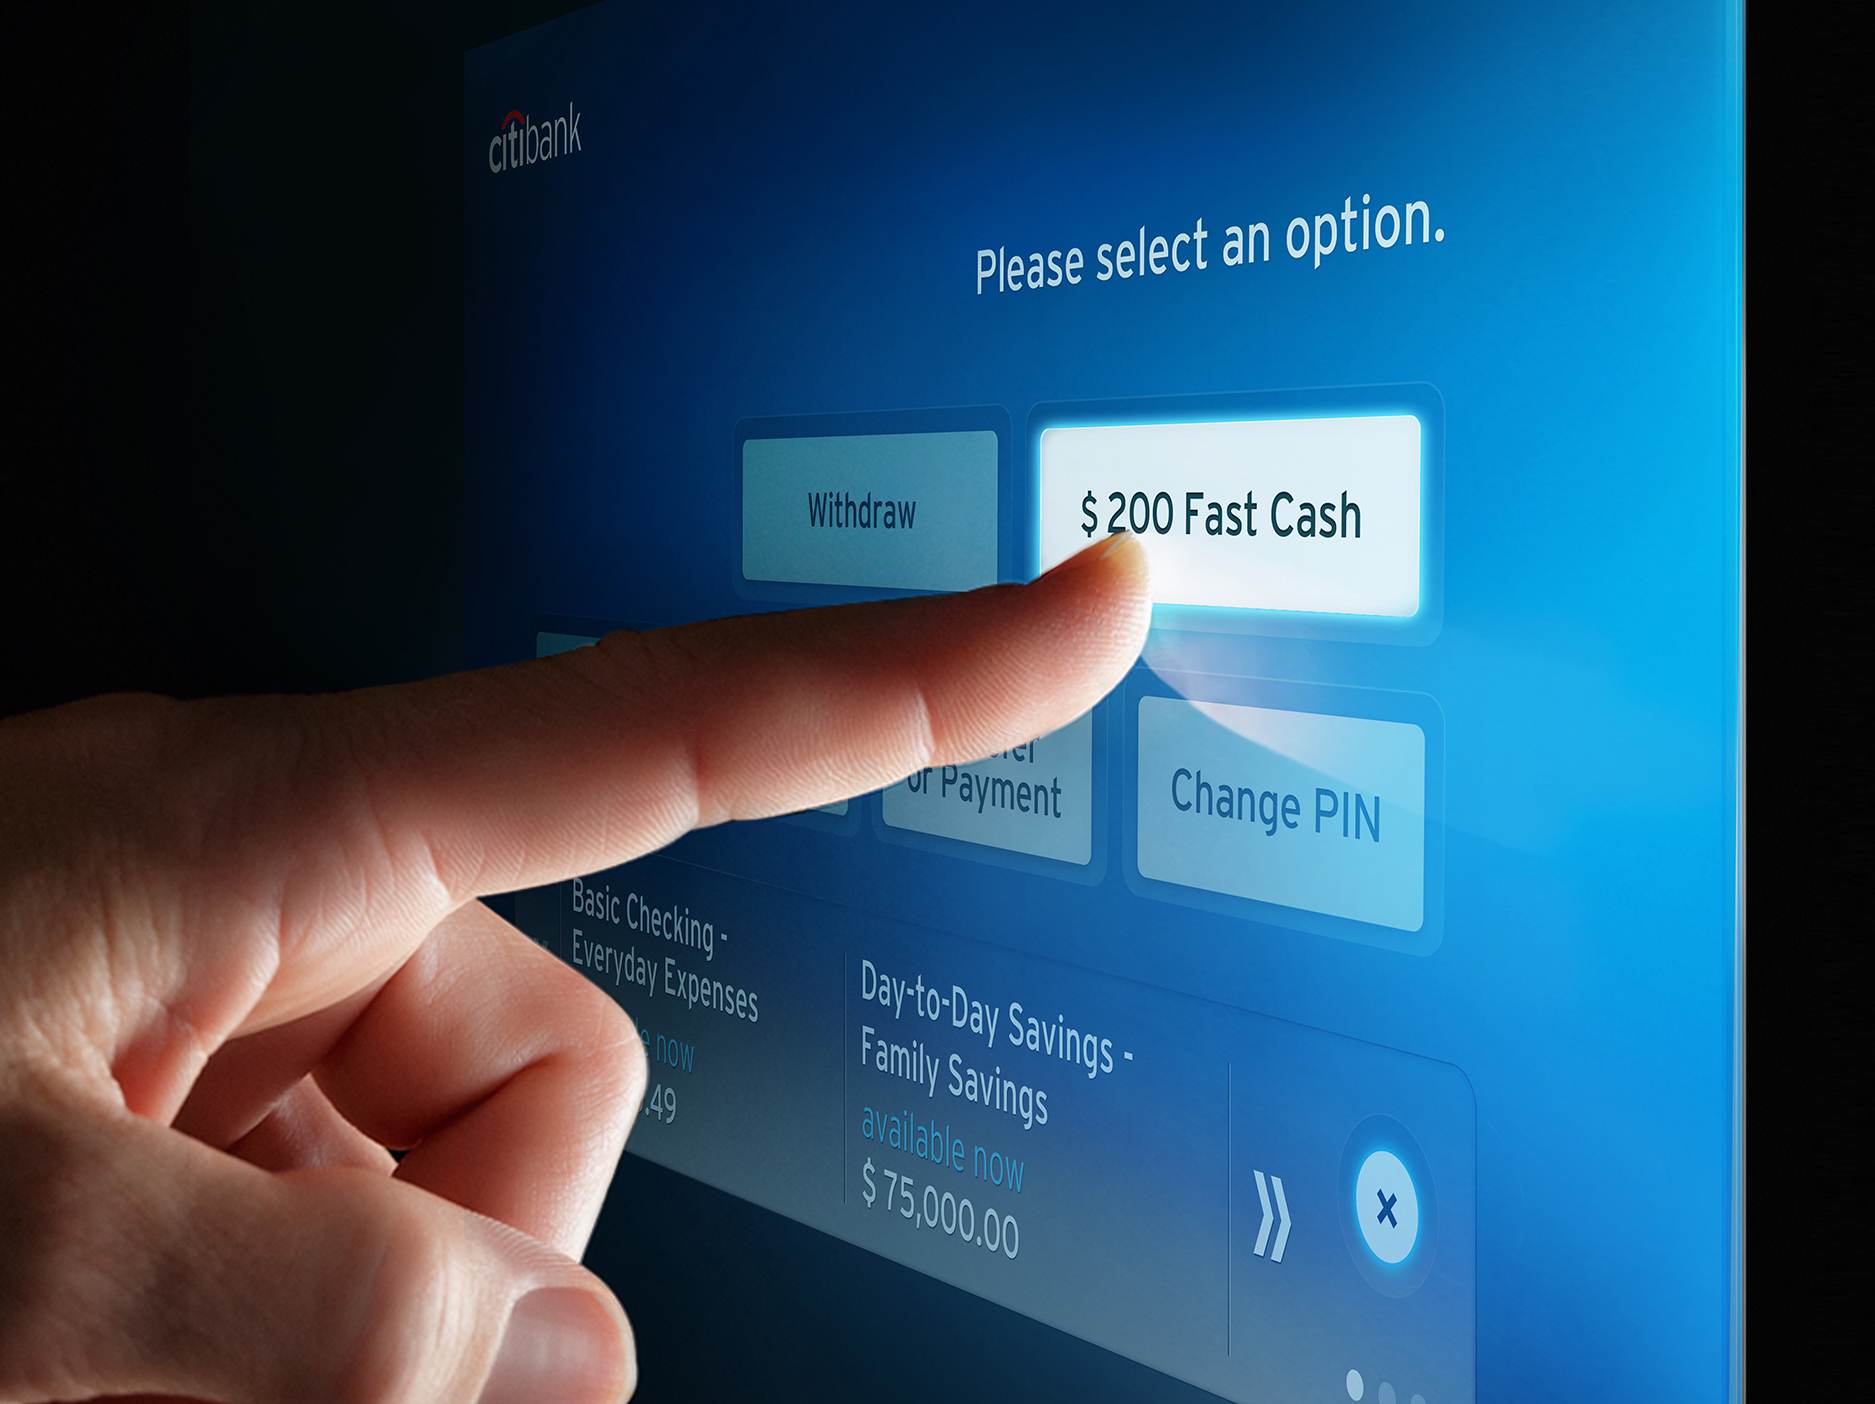 Citibank Unveils New ATM Experience in the U.S. <div><h2>Citibank Review</h2><div><p>With over 110 million customers worldwide, Citibank, the retail banking subsidiary of Citigroup, Inc., is one of the world’s largest global consumer banks. This U.S.-based banking giant’s origins trace all the way back to 1812 in New York. Citibank, or Citi for short, offers a full range of financial services, including personal banking accounts and services. Many of its offerings come packaged together, from basic accounts to private banking and wealth management options.</p><p>This review focuses primarily on personal banking solutions offered by Citibank to help you gauge whether it’s a good fit for your banking needs.</p><p>Account details and annual percentage yields (APYs) are accurate as of <a href=